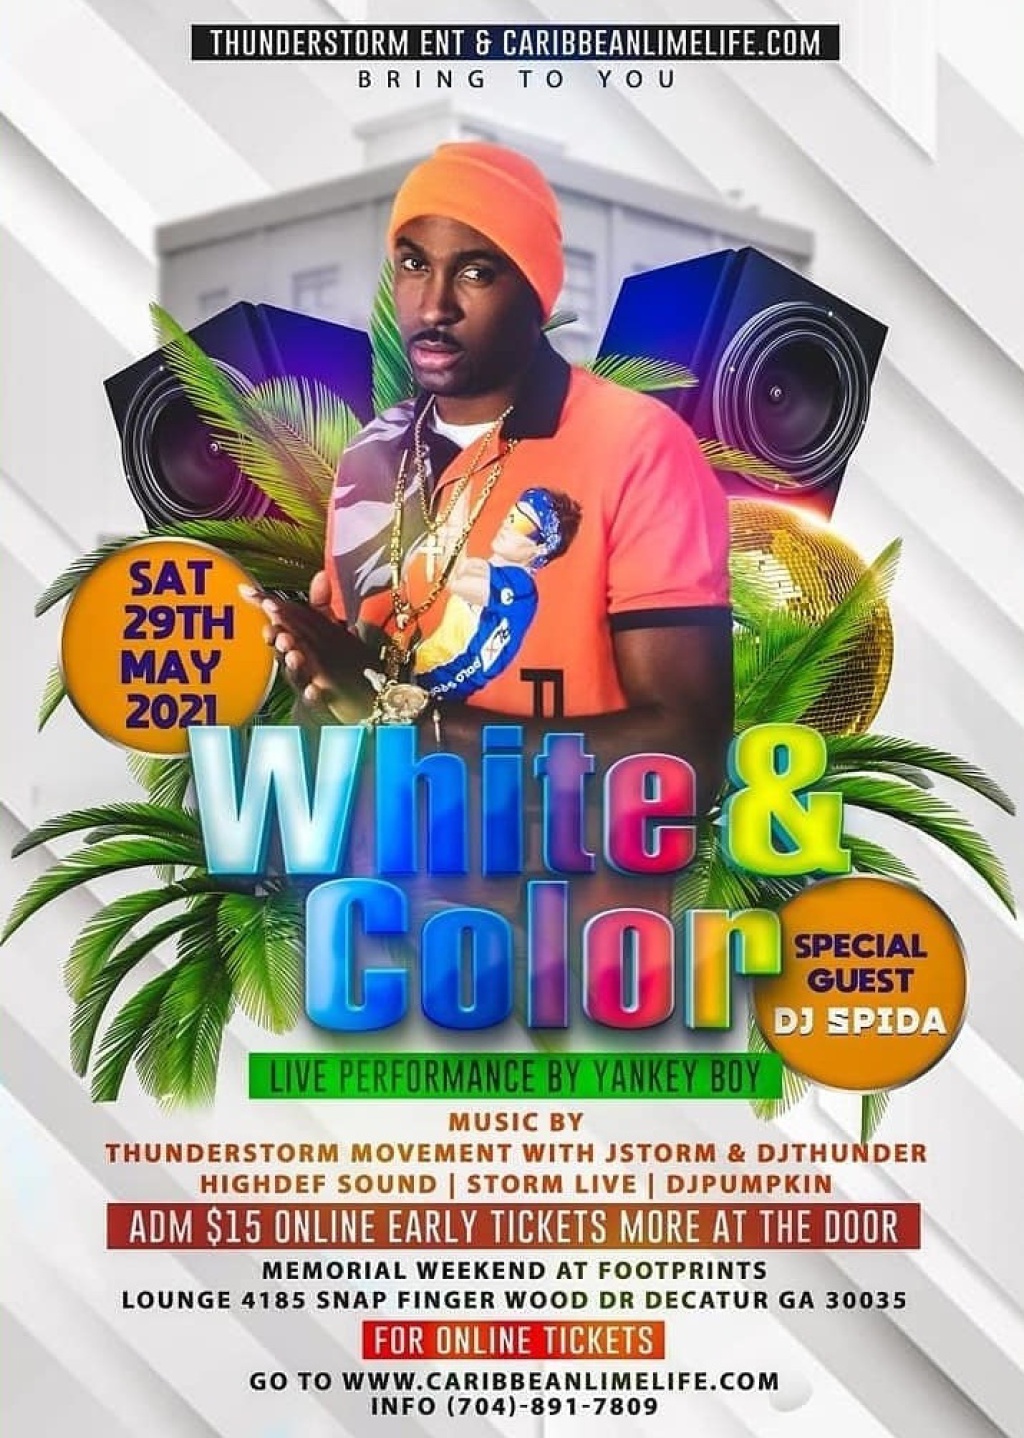 White & Color flyer or graphic.